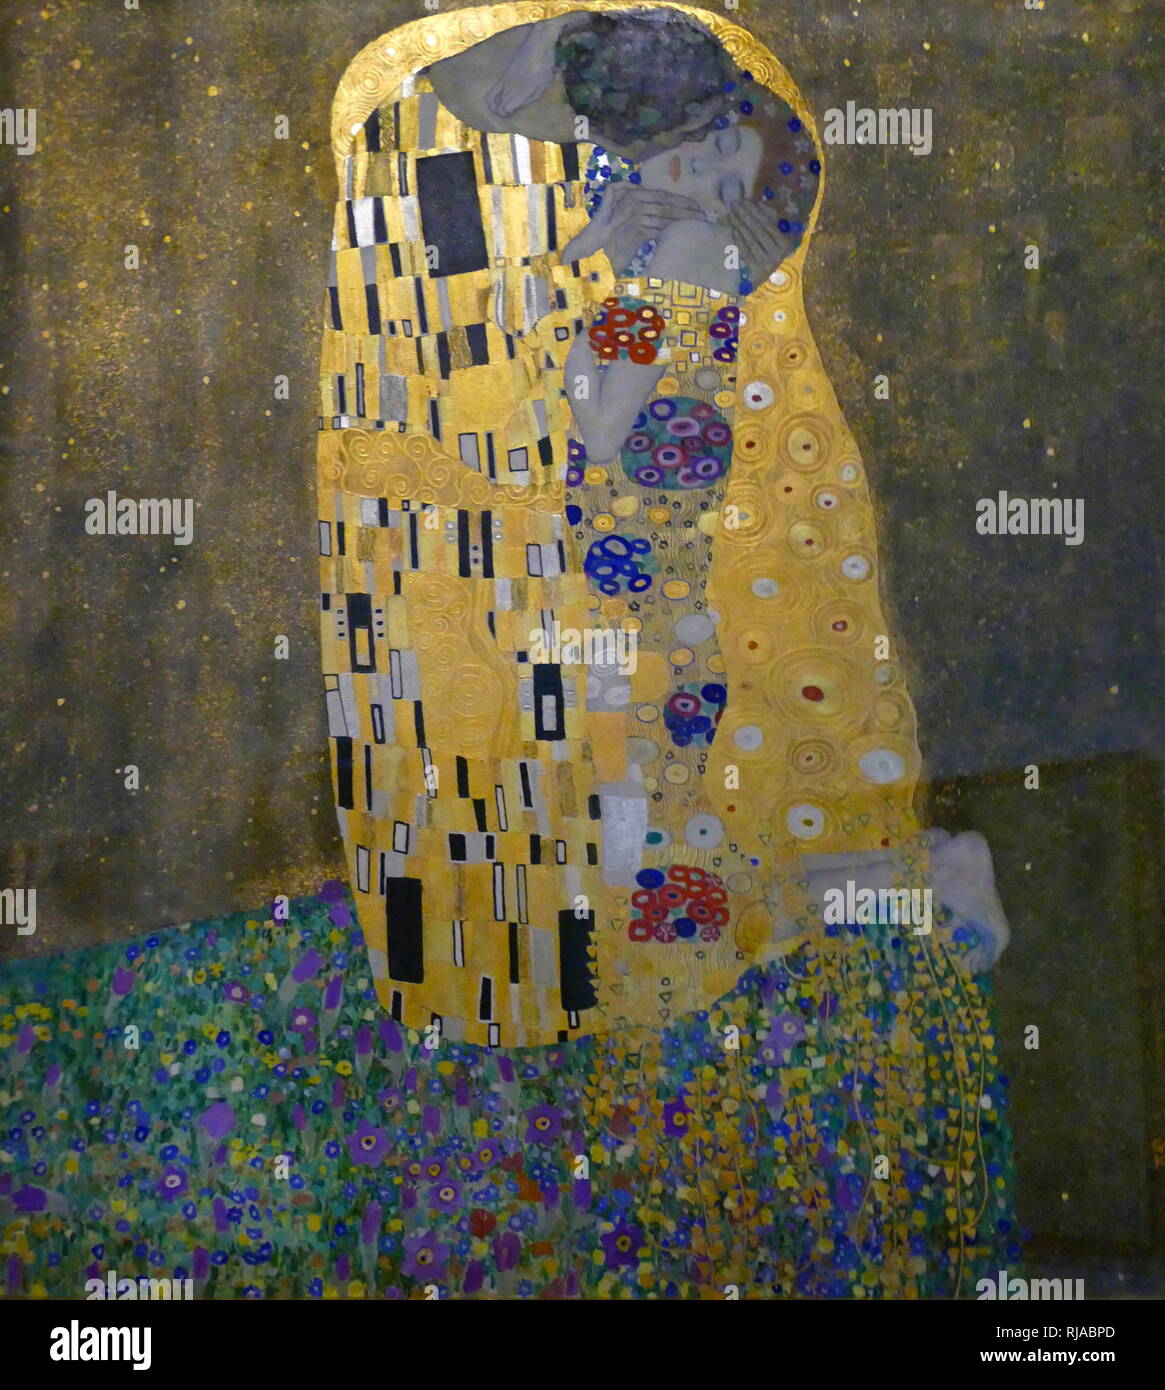 The Kiss (Klimt painting), a 1907 golden painting by Gustav Klimt. The Kiss (Liebespaar) is an oil, gold, and silver-leaf painting by the Austrian Symbolist painter Gustav Klimt, and was painted between 1907 and 1908 during the height of Klimt's 'Golden Period'. The painting depicts a couple embracing one another, their bodies entwined in elaborate robes decorated in a style influenced by the contemporary Art Nouveau style Stock Photo